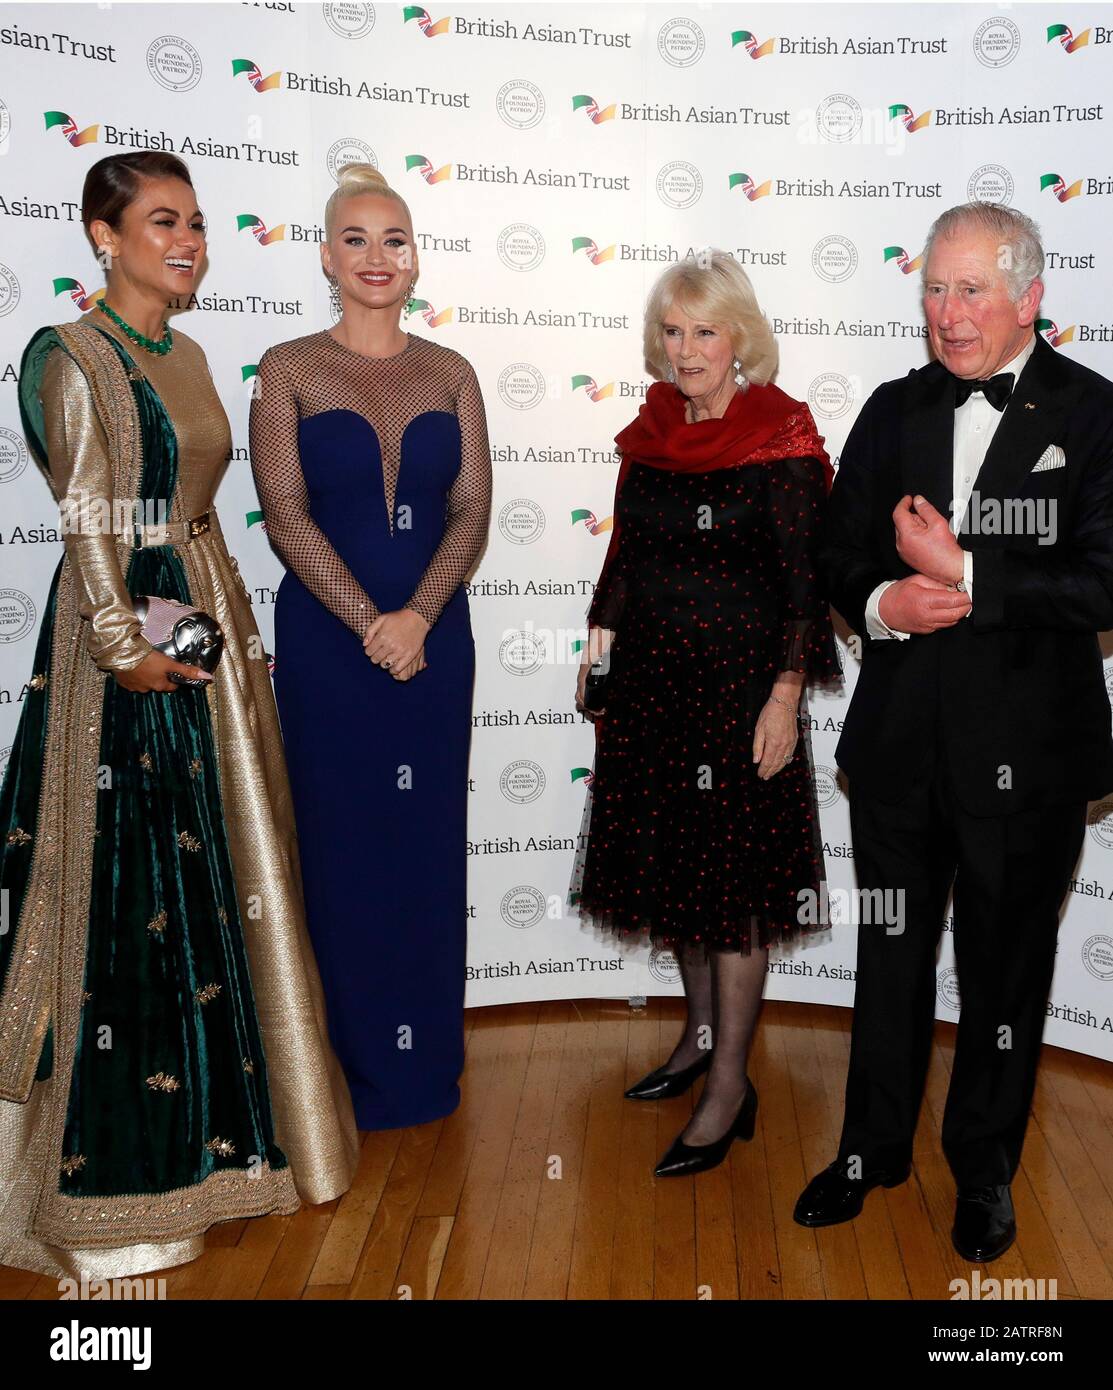 The Prince of Wales and the Duchess of Cornwall with Indian businesswoman Natasha Poonawalla (left) and musician Katy Perry (centre left), as they attend a reception for supporters of the British Asian Trust at Banqueting House, Whitehall, London. Stock Photo